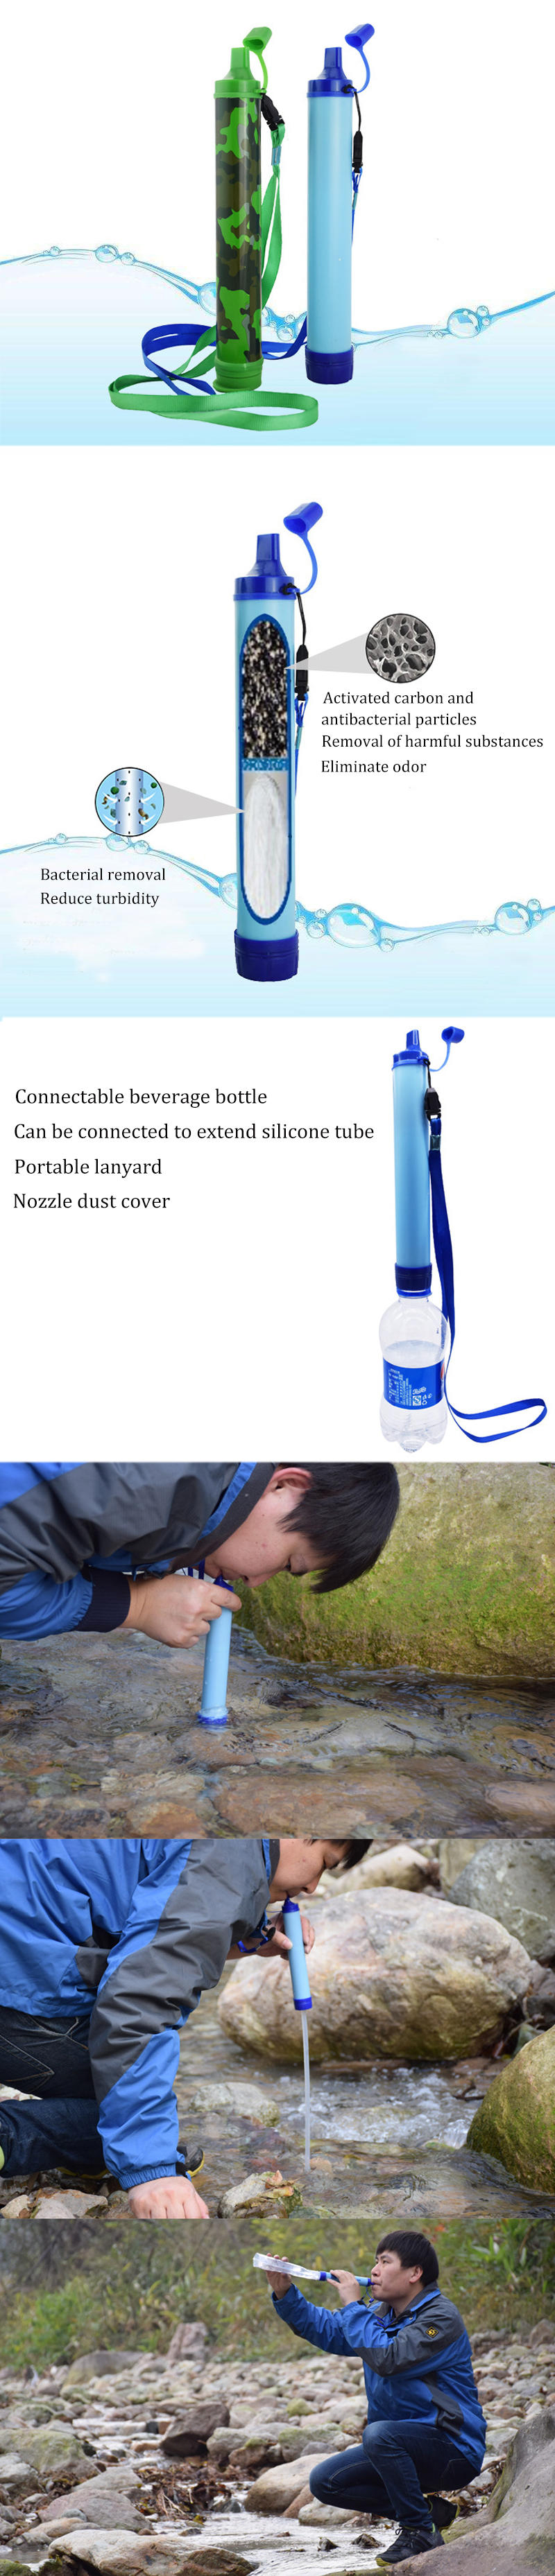 IPReereg-Portable-Water-Filter-Straw-Purifier-Cleaner-Emergency-Safety-Survival-Drinking-Tool-Kit-1362584-1